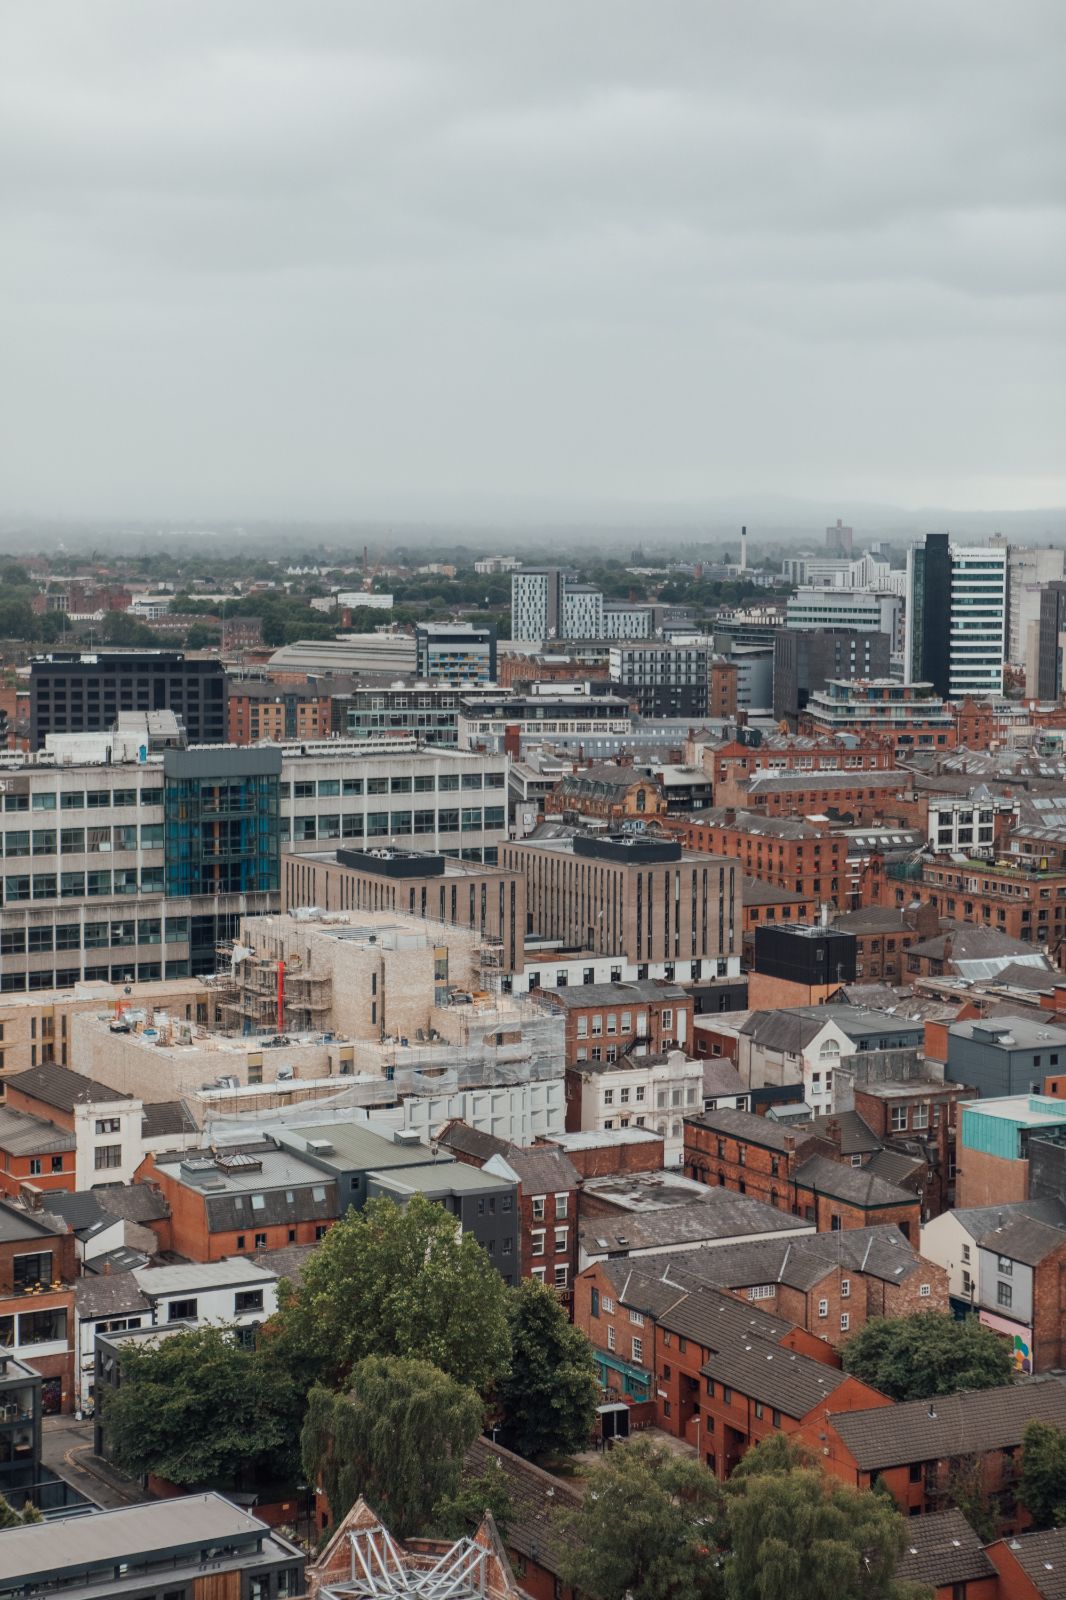 View from Swan Street House over Manchester, red brick buildings and trees. Soft grey daytime lighting.